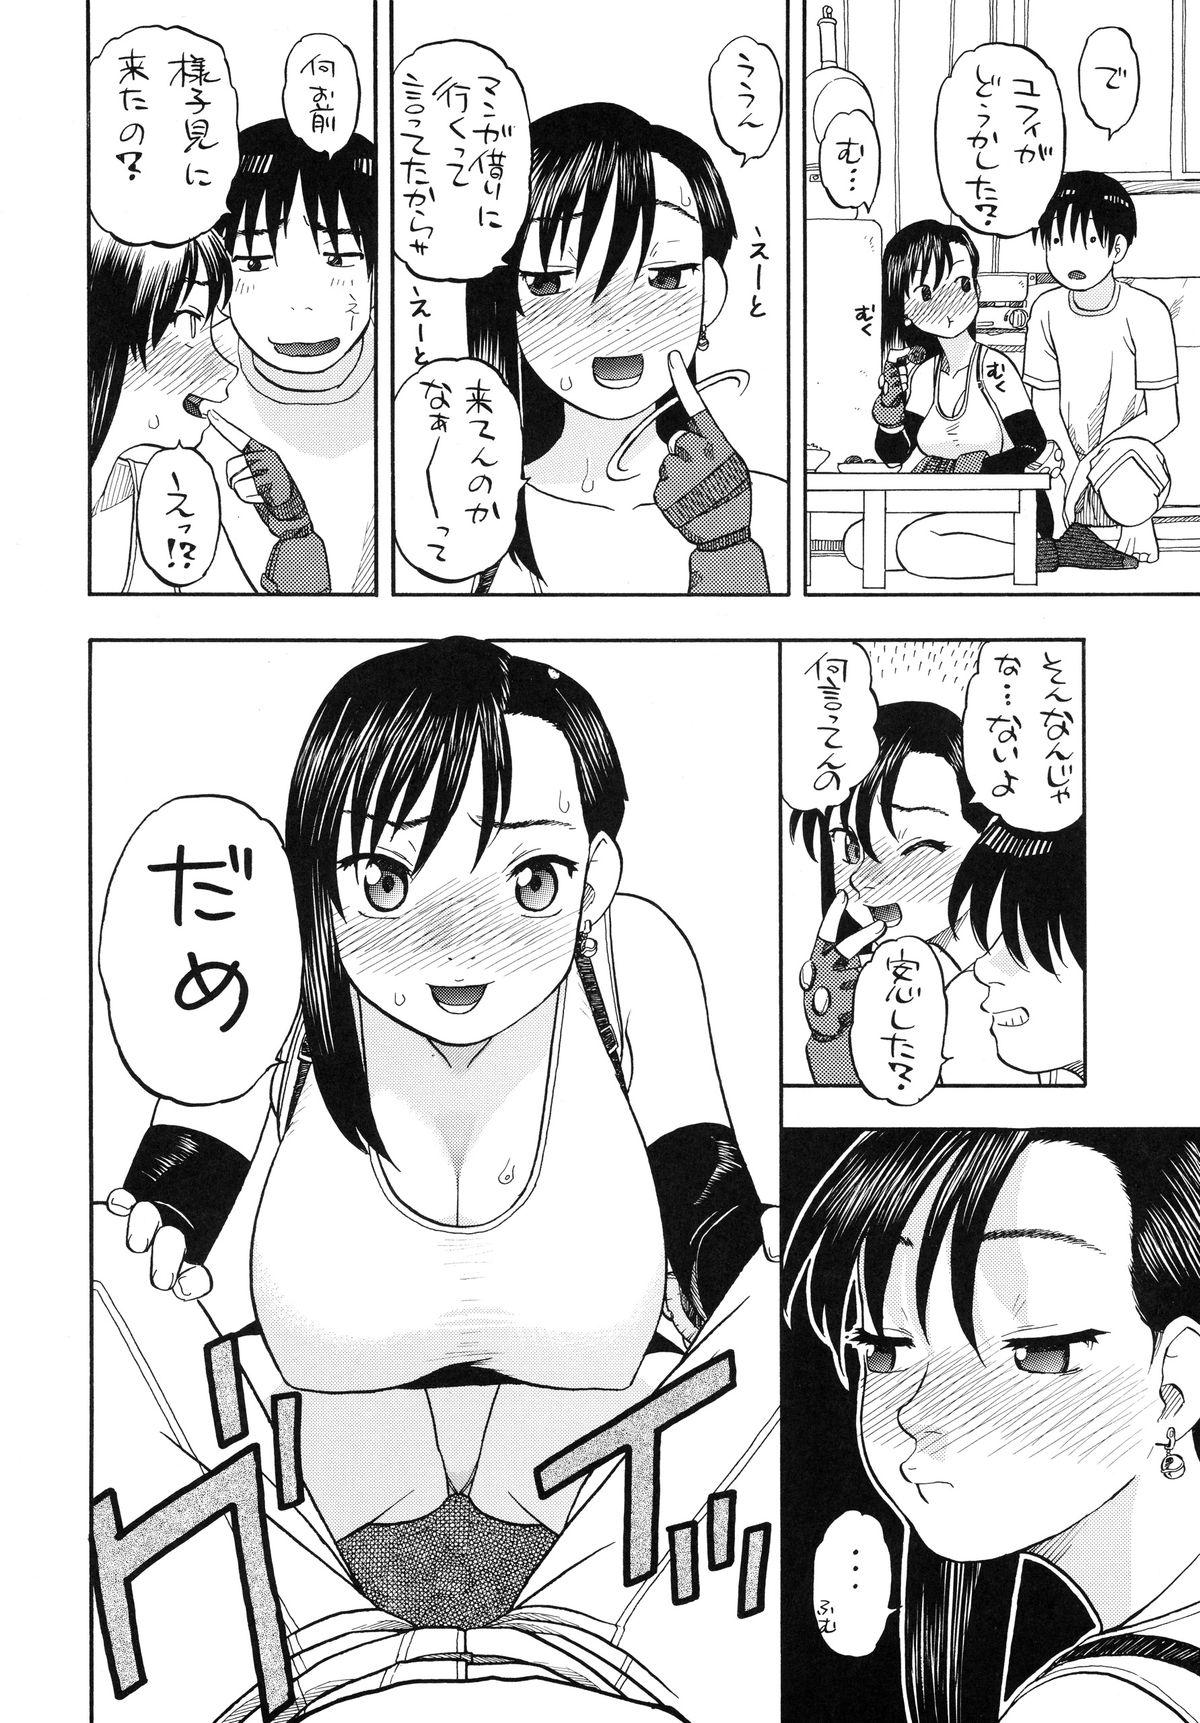 Tifa to Yuffie to Yojouhan 5